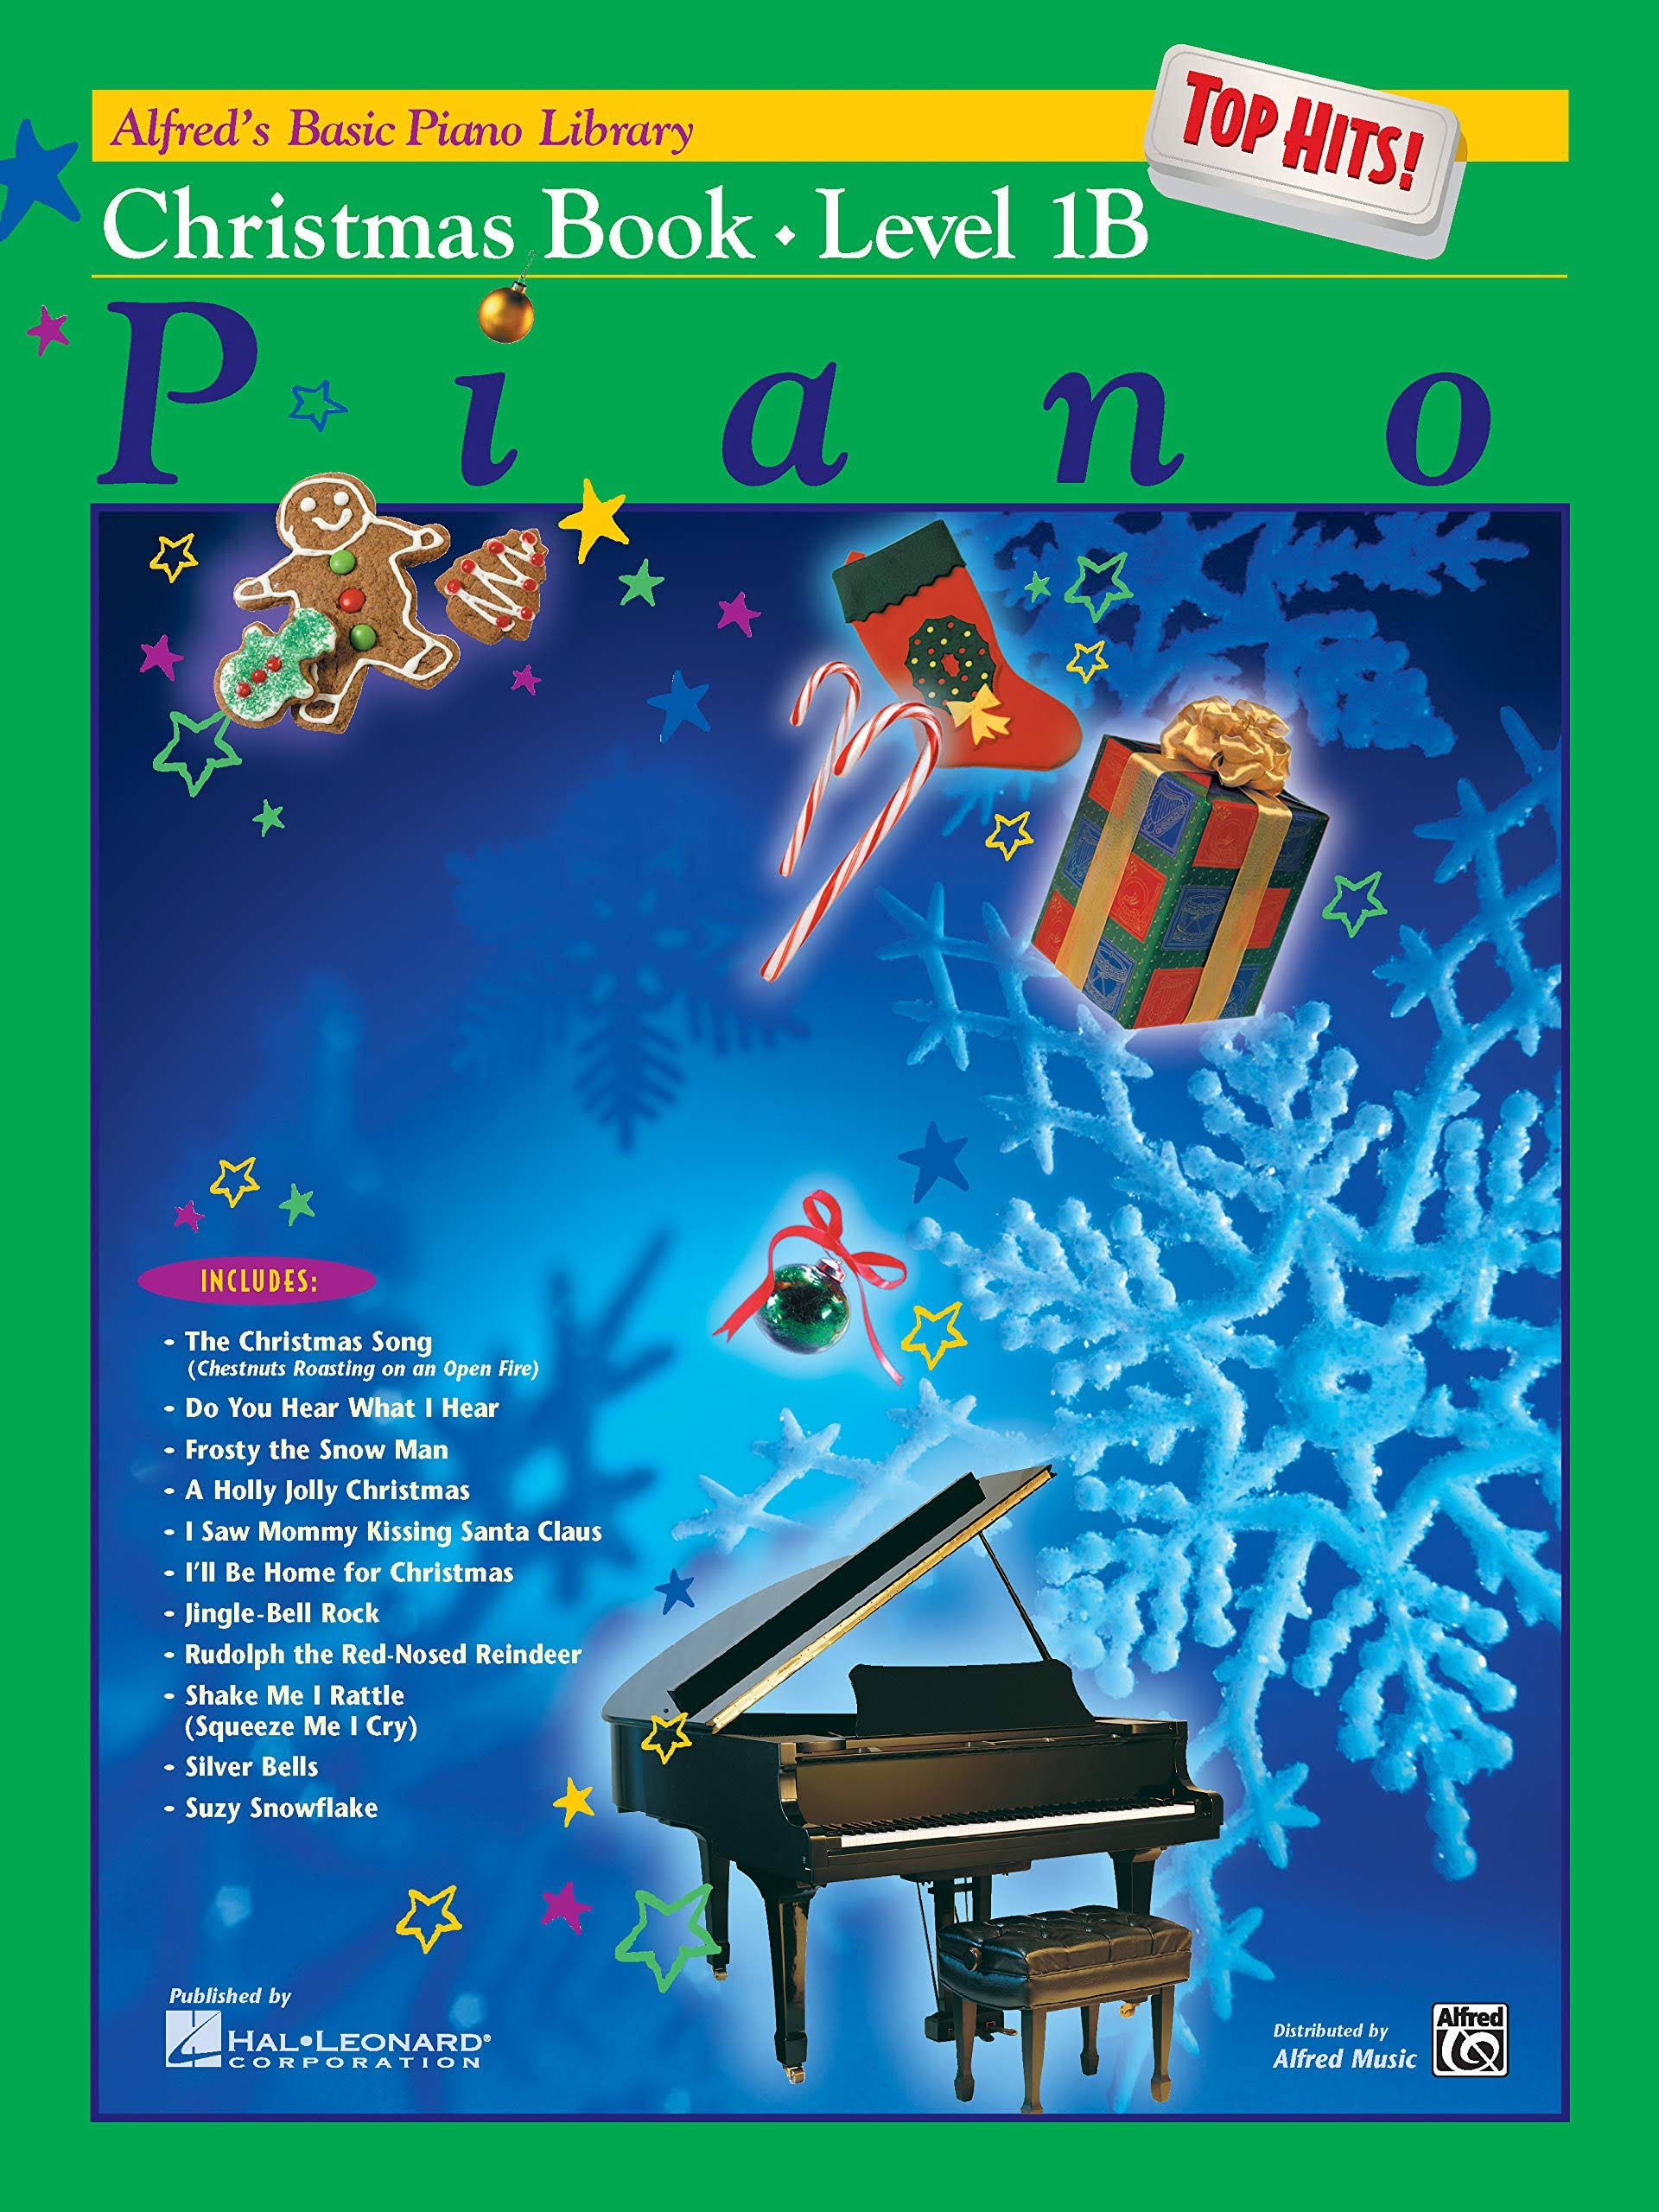 Alfred's Basic Piano Course: Top Hits! Christmas Book 1B